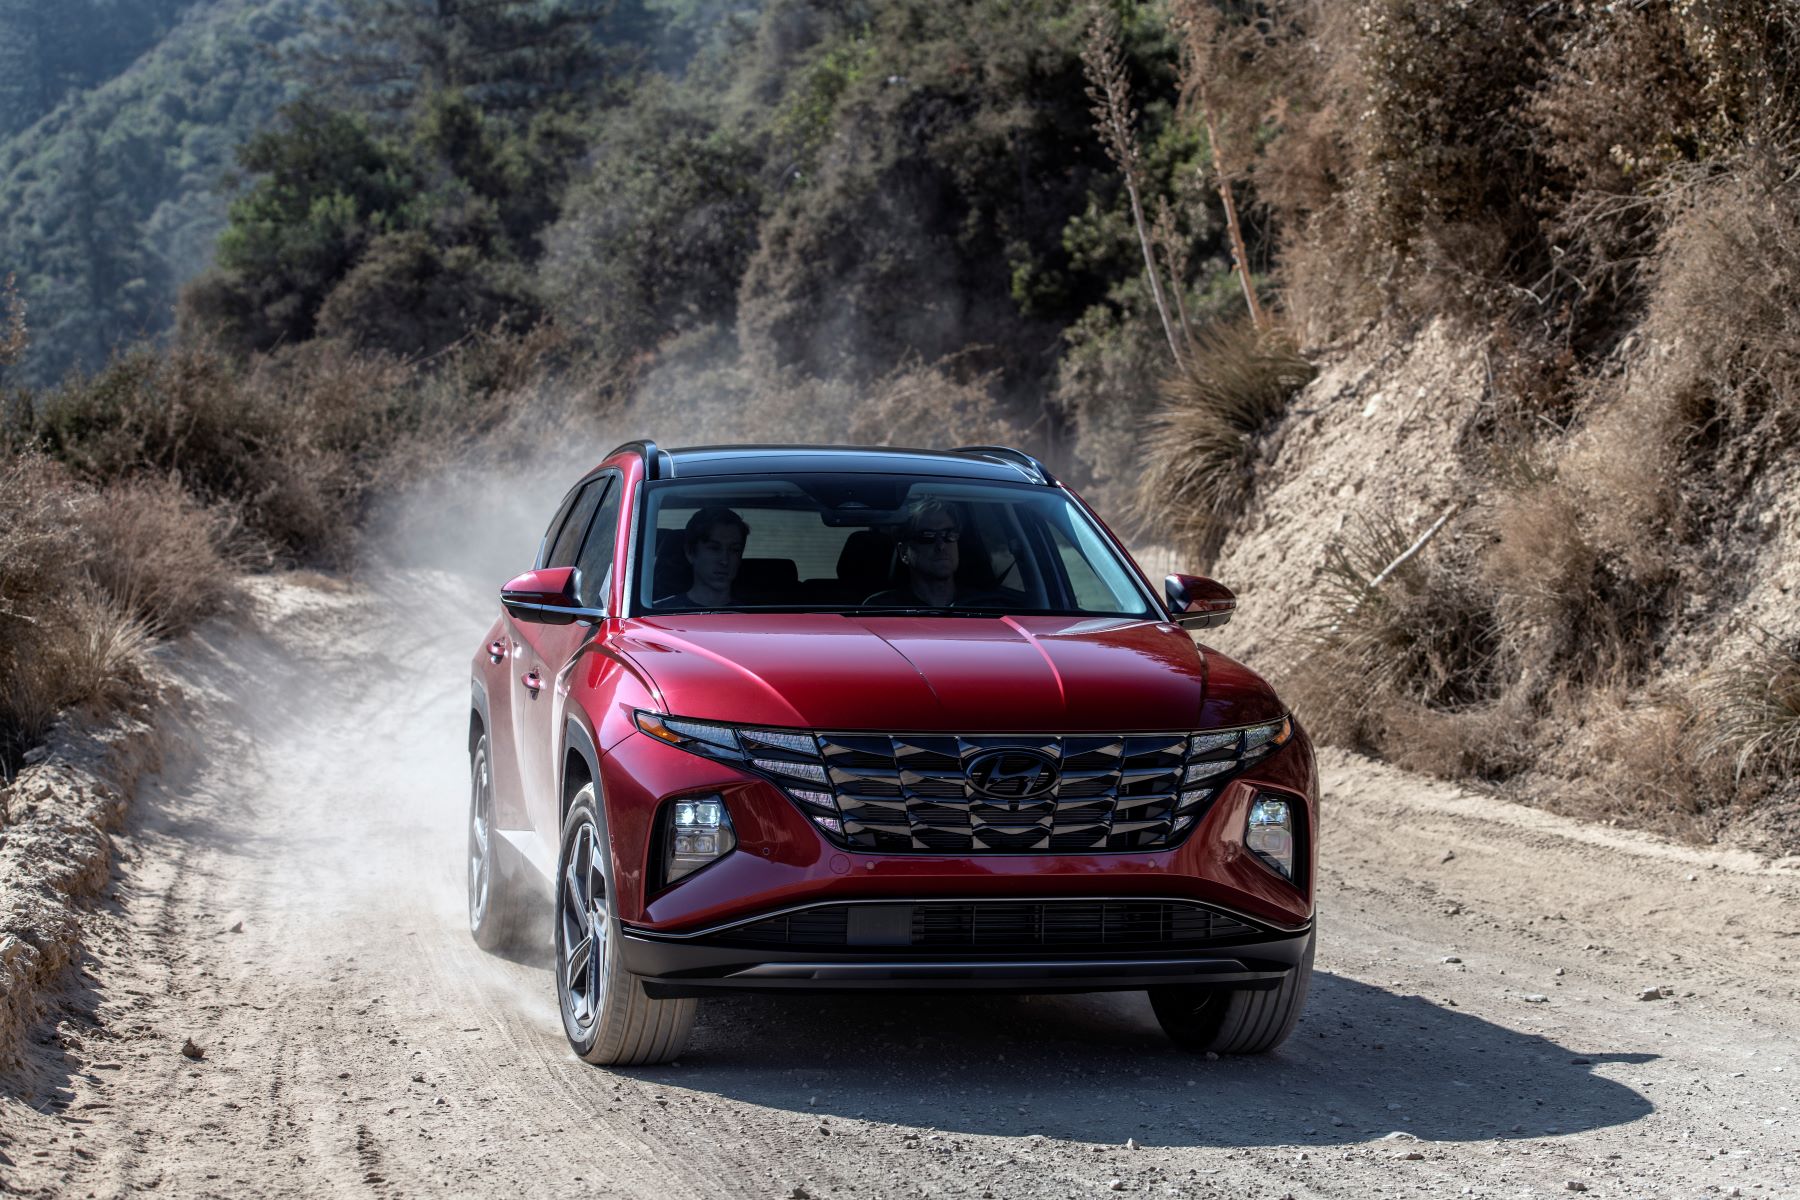 A red 2023 Hyundai Tucson compact SUV model driving on a dirt road as its tires kick up dust